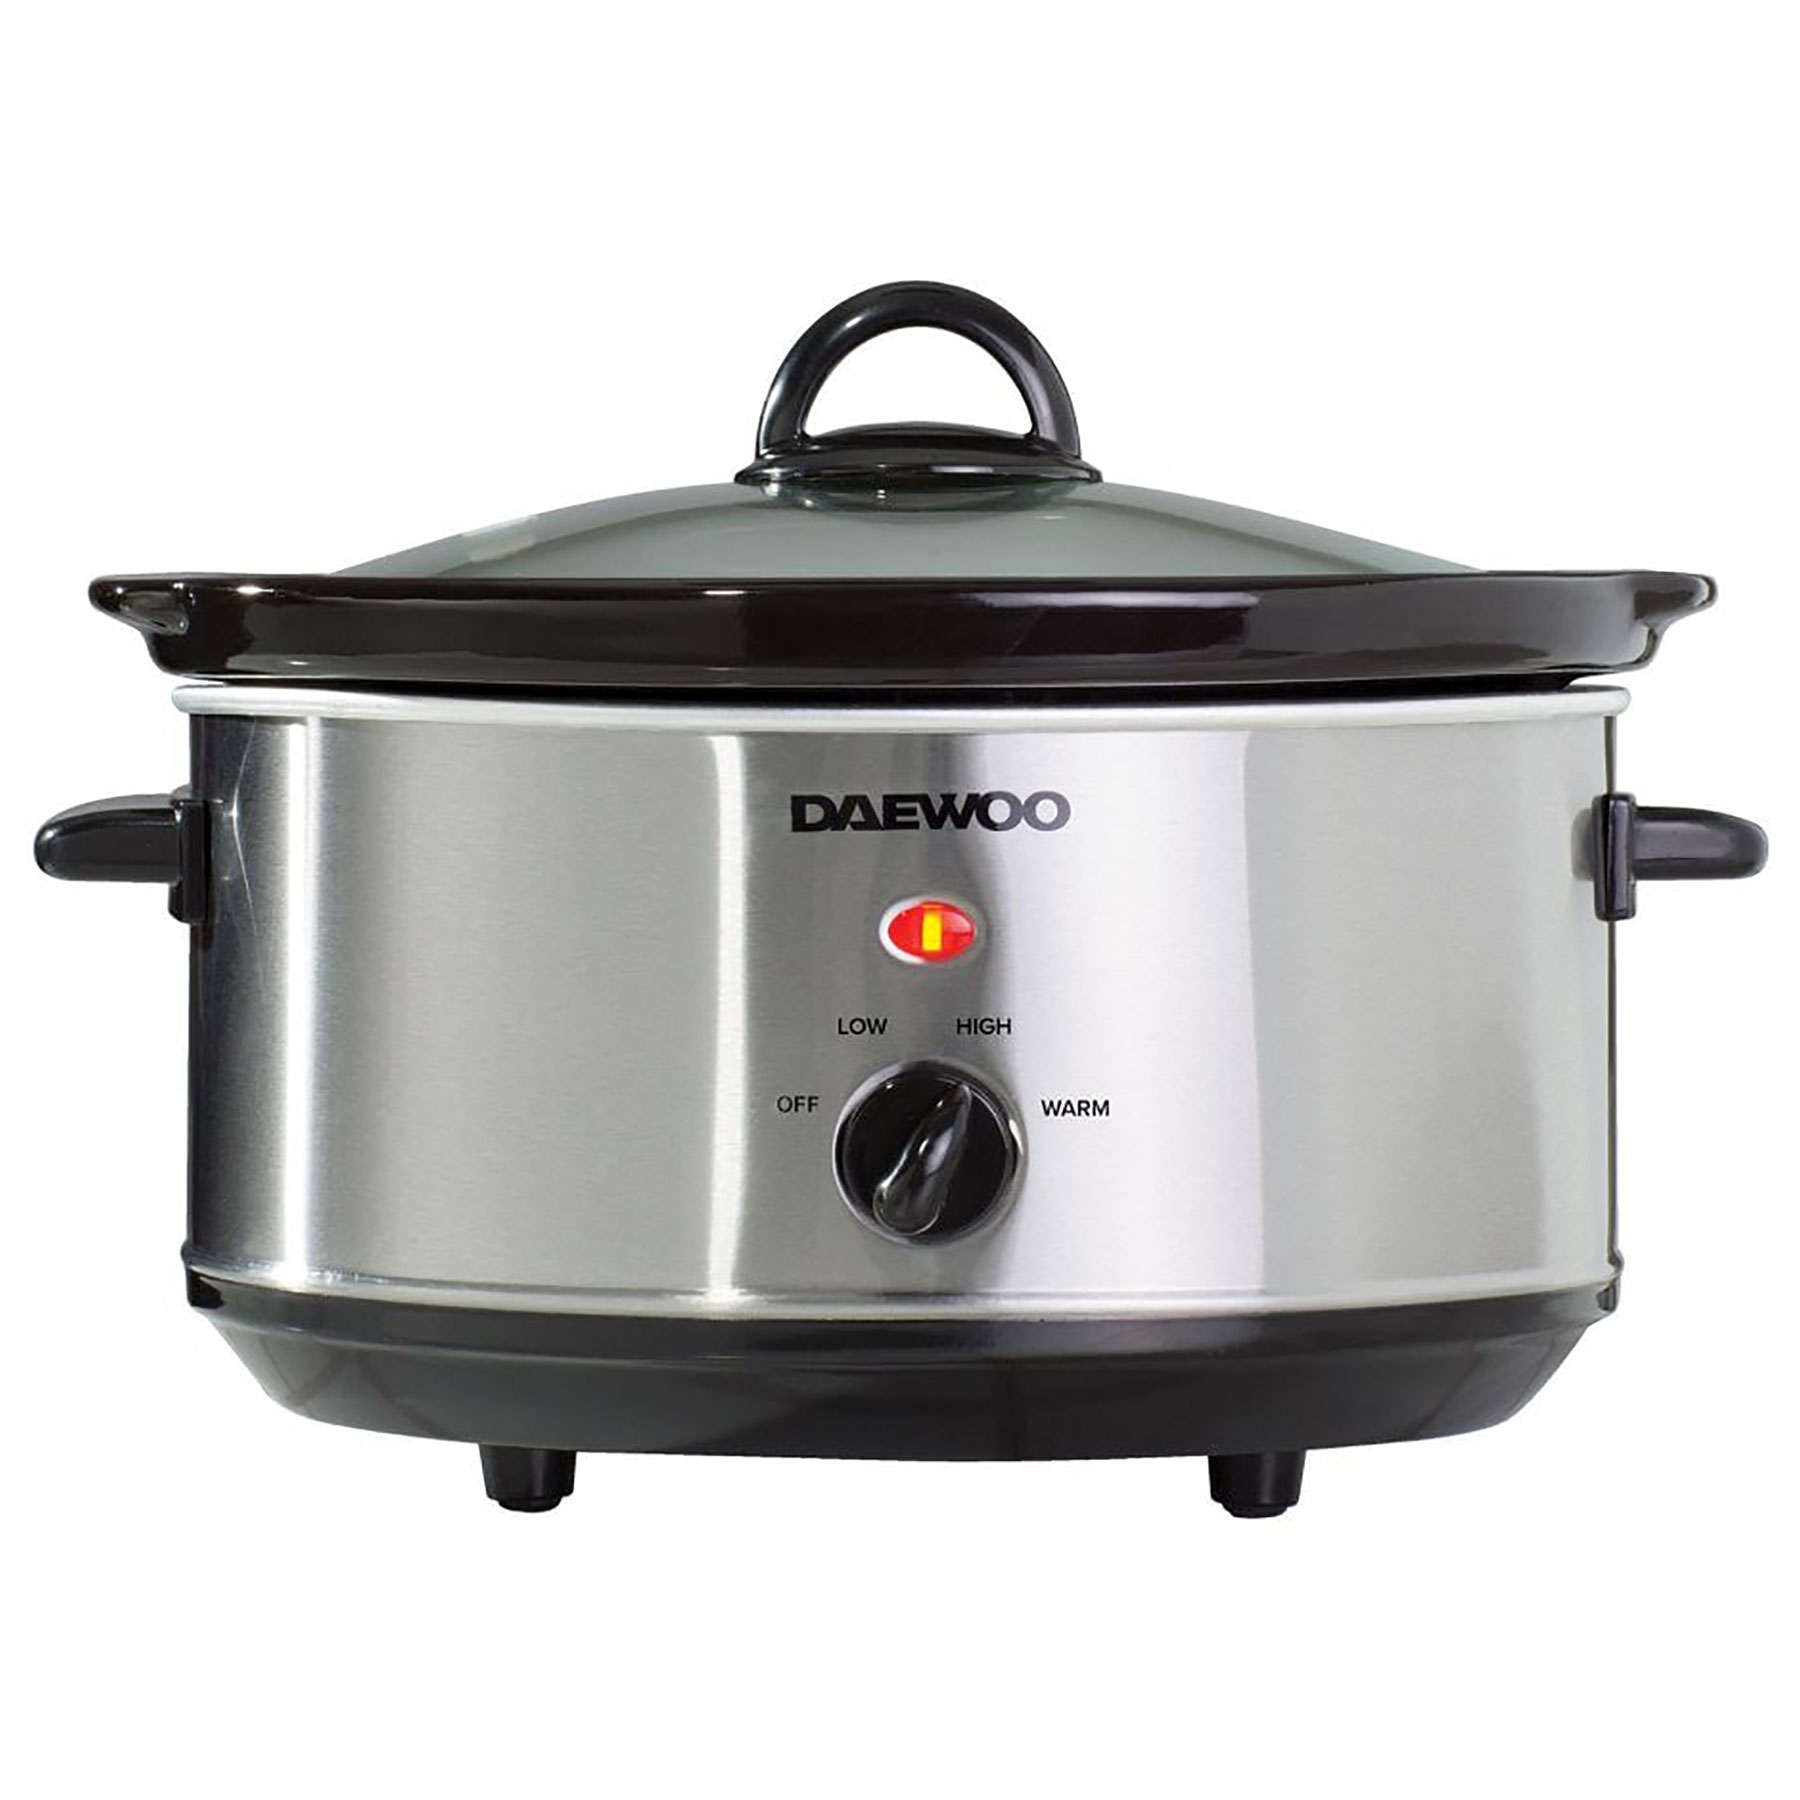 Image of Daewoo SDA1364GE 3 5 Litre Slow Cooker in Stainless Steel